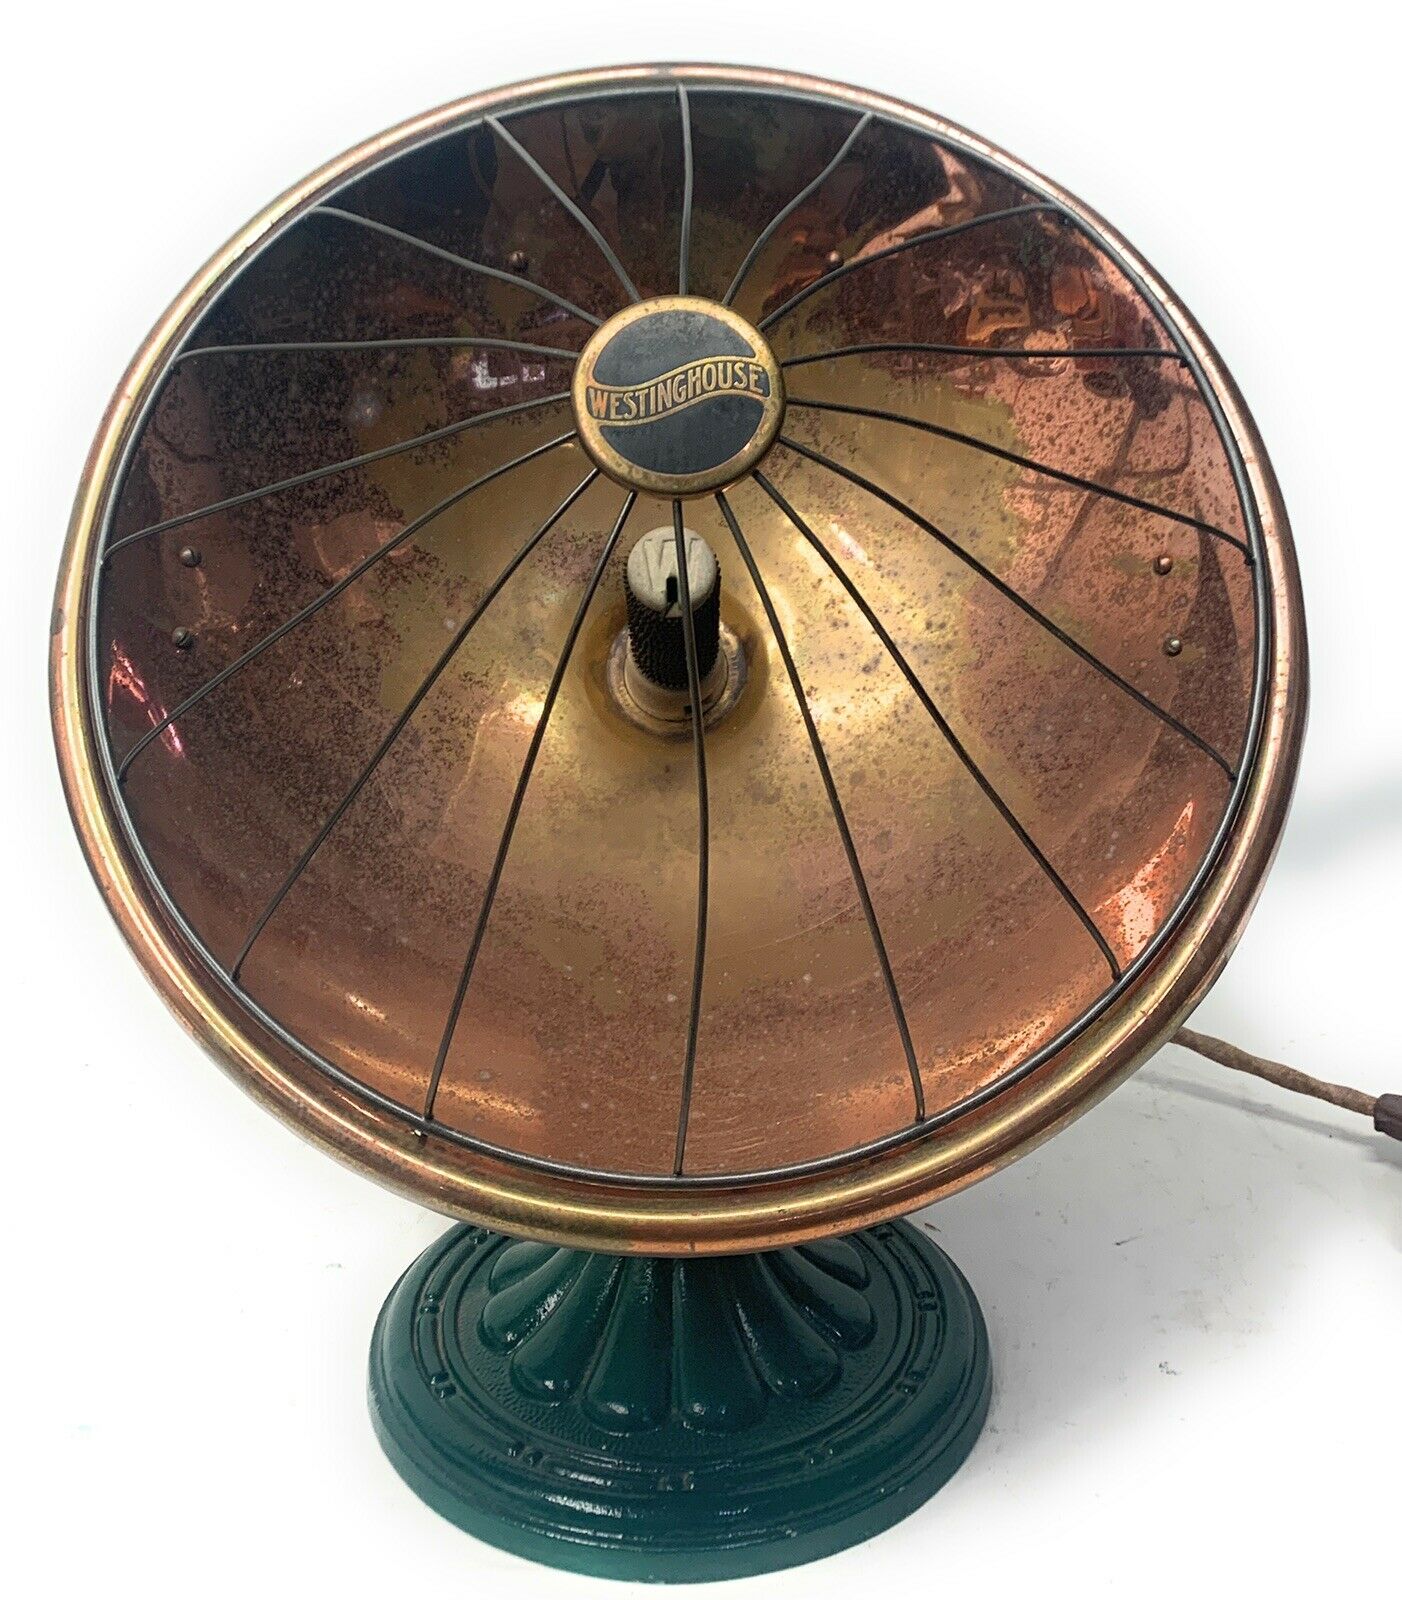 Vintage-Canadian_-Westinghouse-Copper-Heater_2_1024x1024@2x-61bef27b